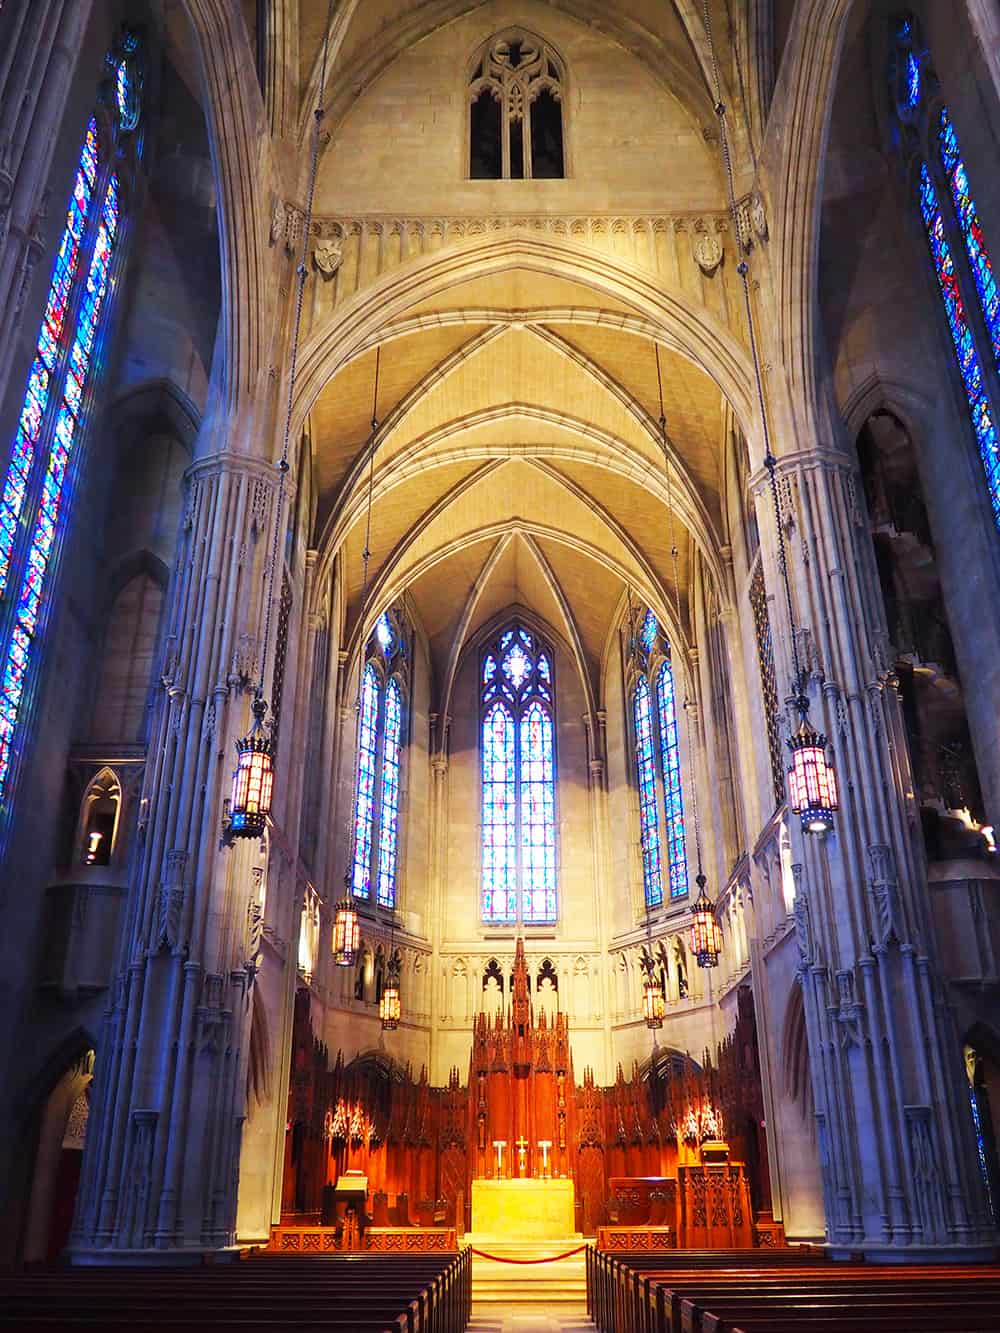 The Heinz Memorial Chapel was built on University of Pittsburgh's campus to be an interdenominational chapel. The chapel was built in a neo-gothic style to honor the family legacy of the Heinz matriarch. | affordable family day trip + places to visit in Pittsburgh, Pennsylvania via Autumn All Along